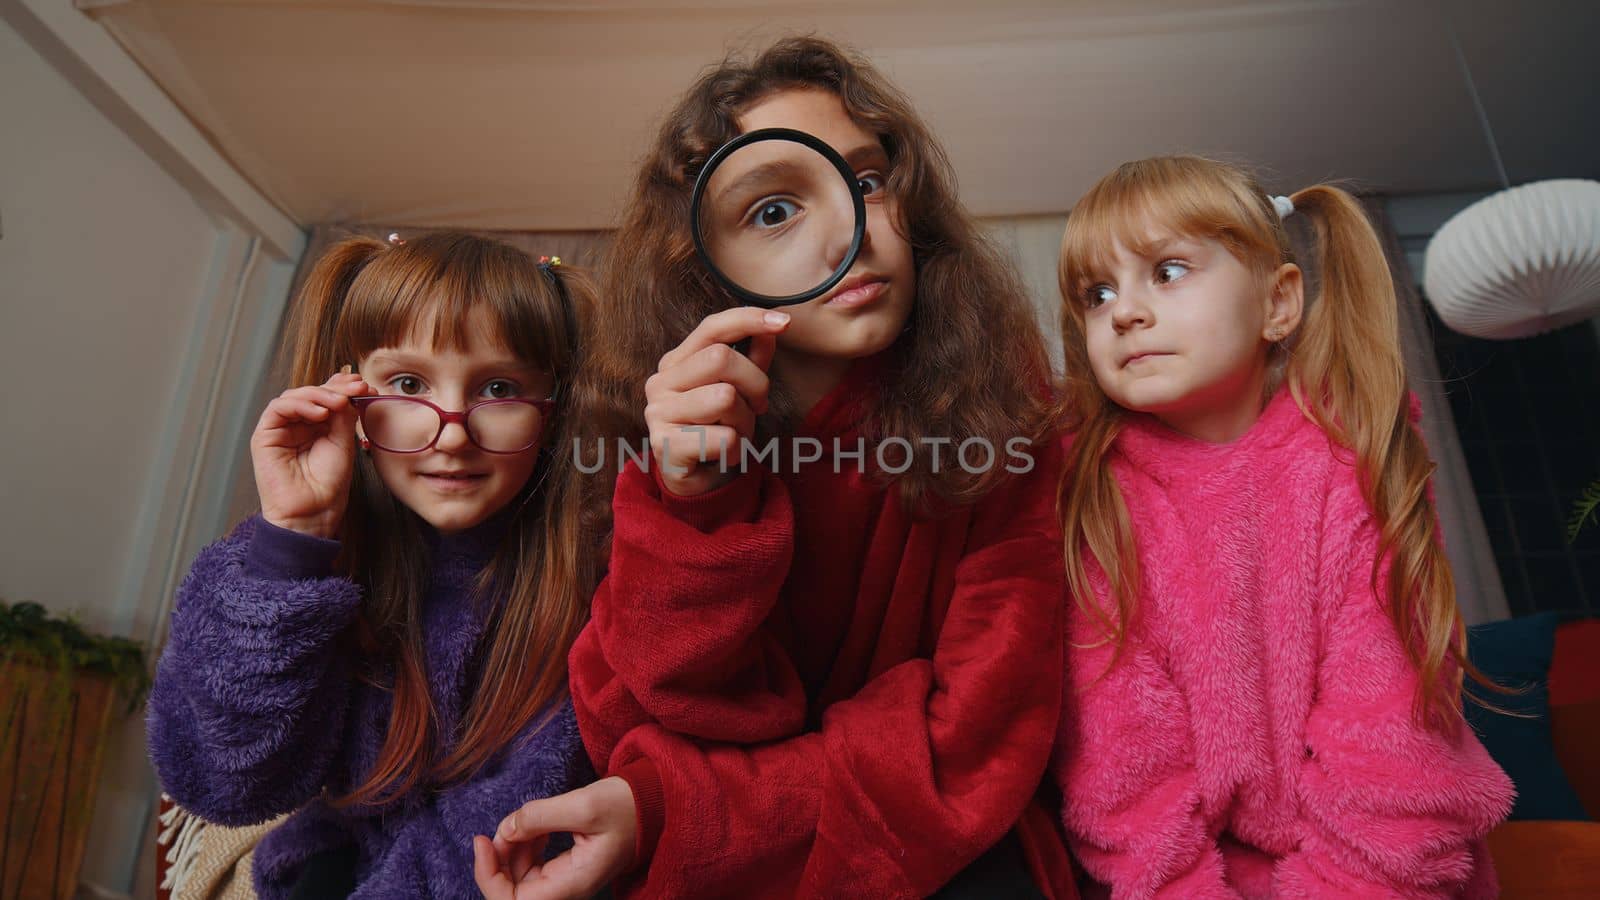 Children sisters girls holding magnifying glass near face, looking into camera, analysing, playing by efuror